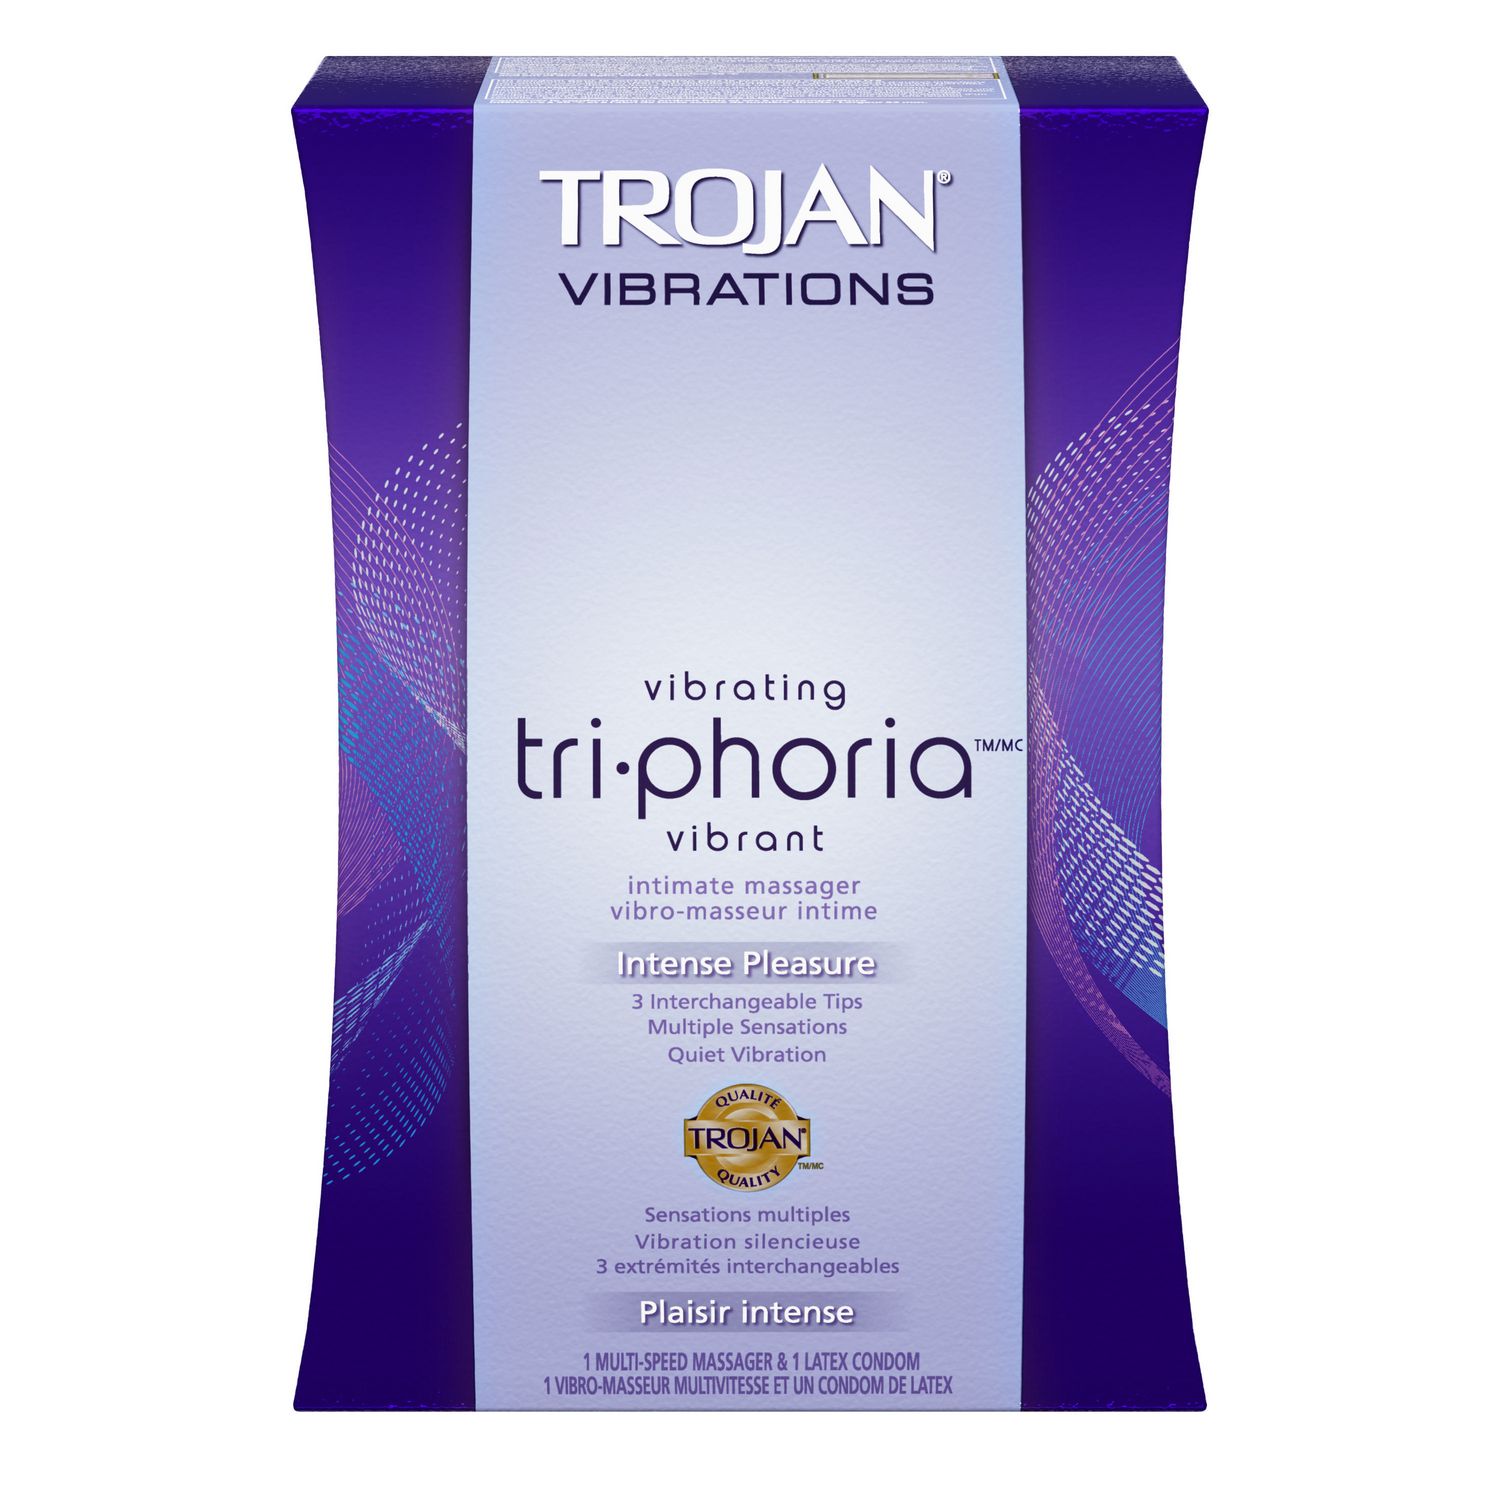 There’s so much the TROJAN TRI-PHORIA intimate massager can do…and that giv...